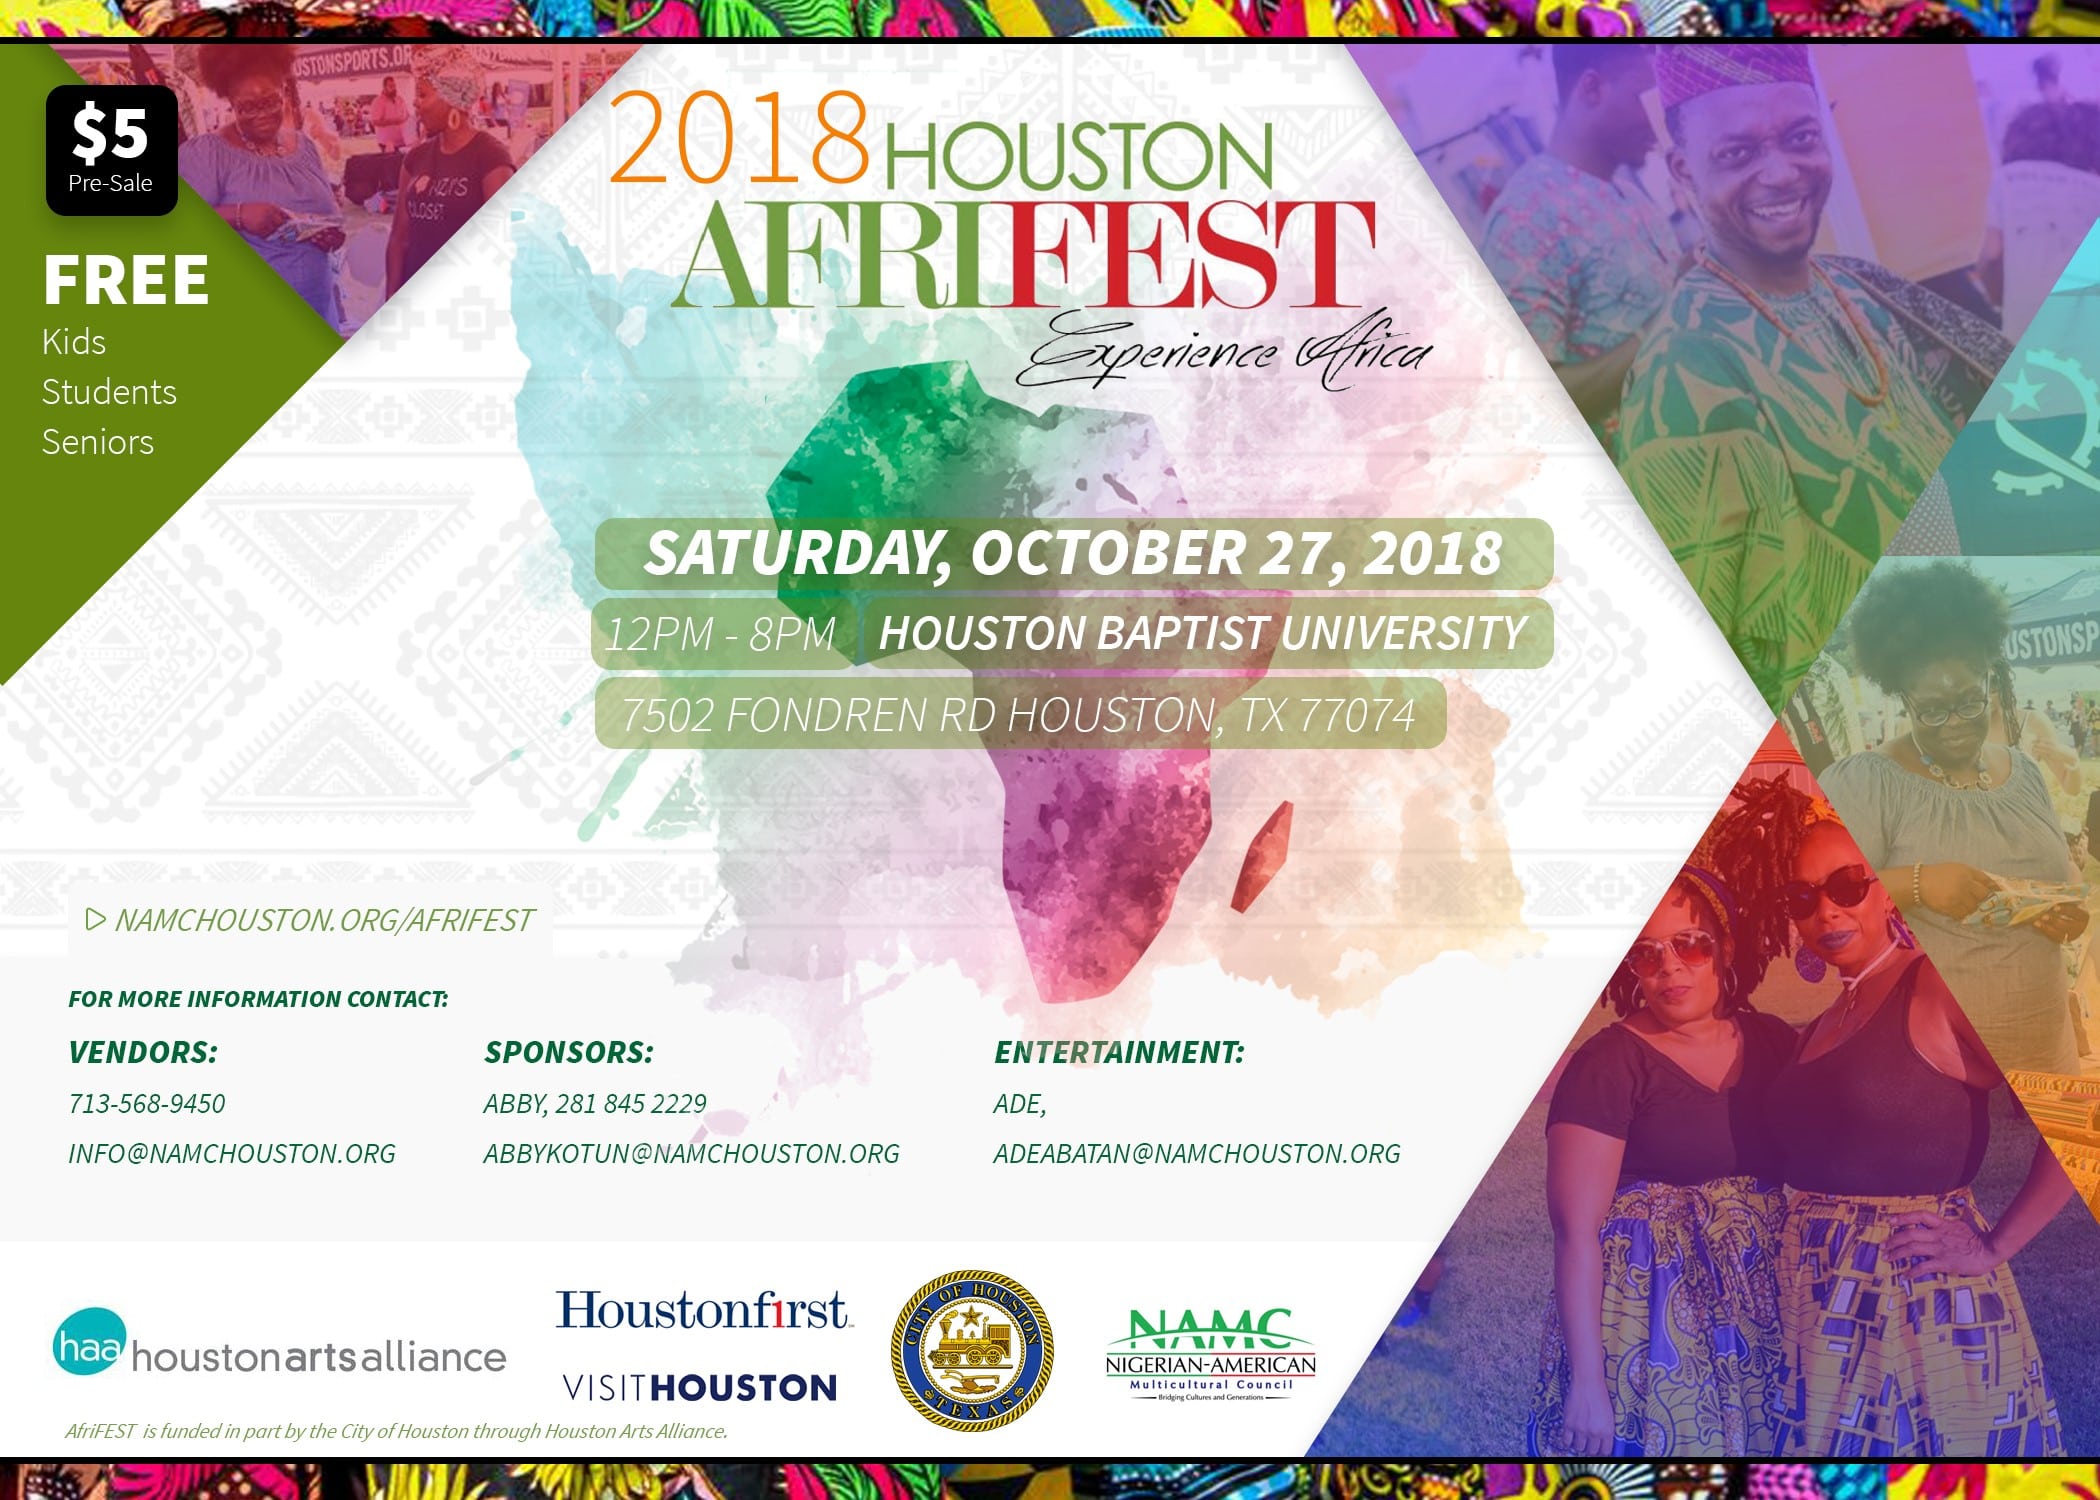 HOUSTONIANS TO EXPERIENCE THE SIGHTS AND SOUNDS OF AFRICA AT HOME